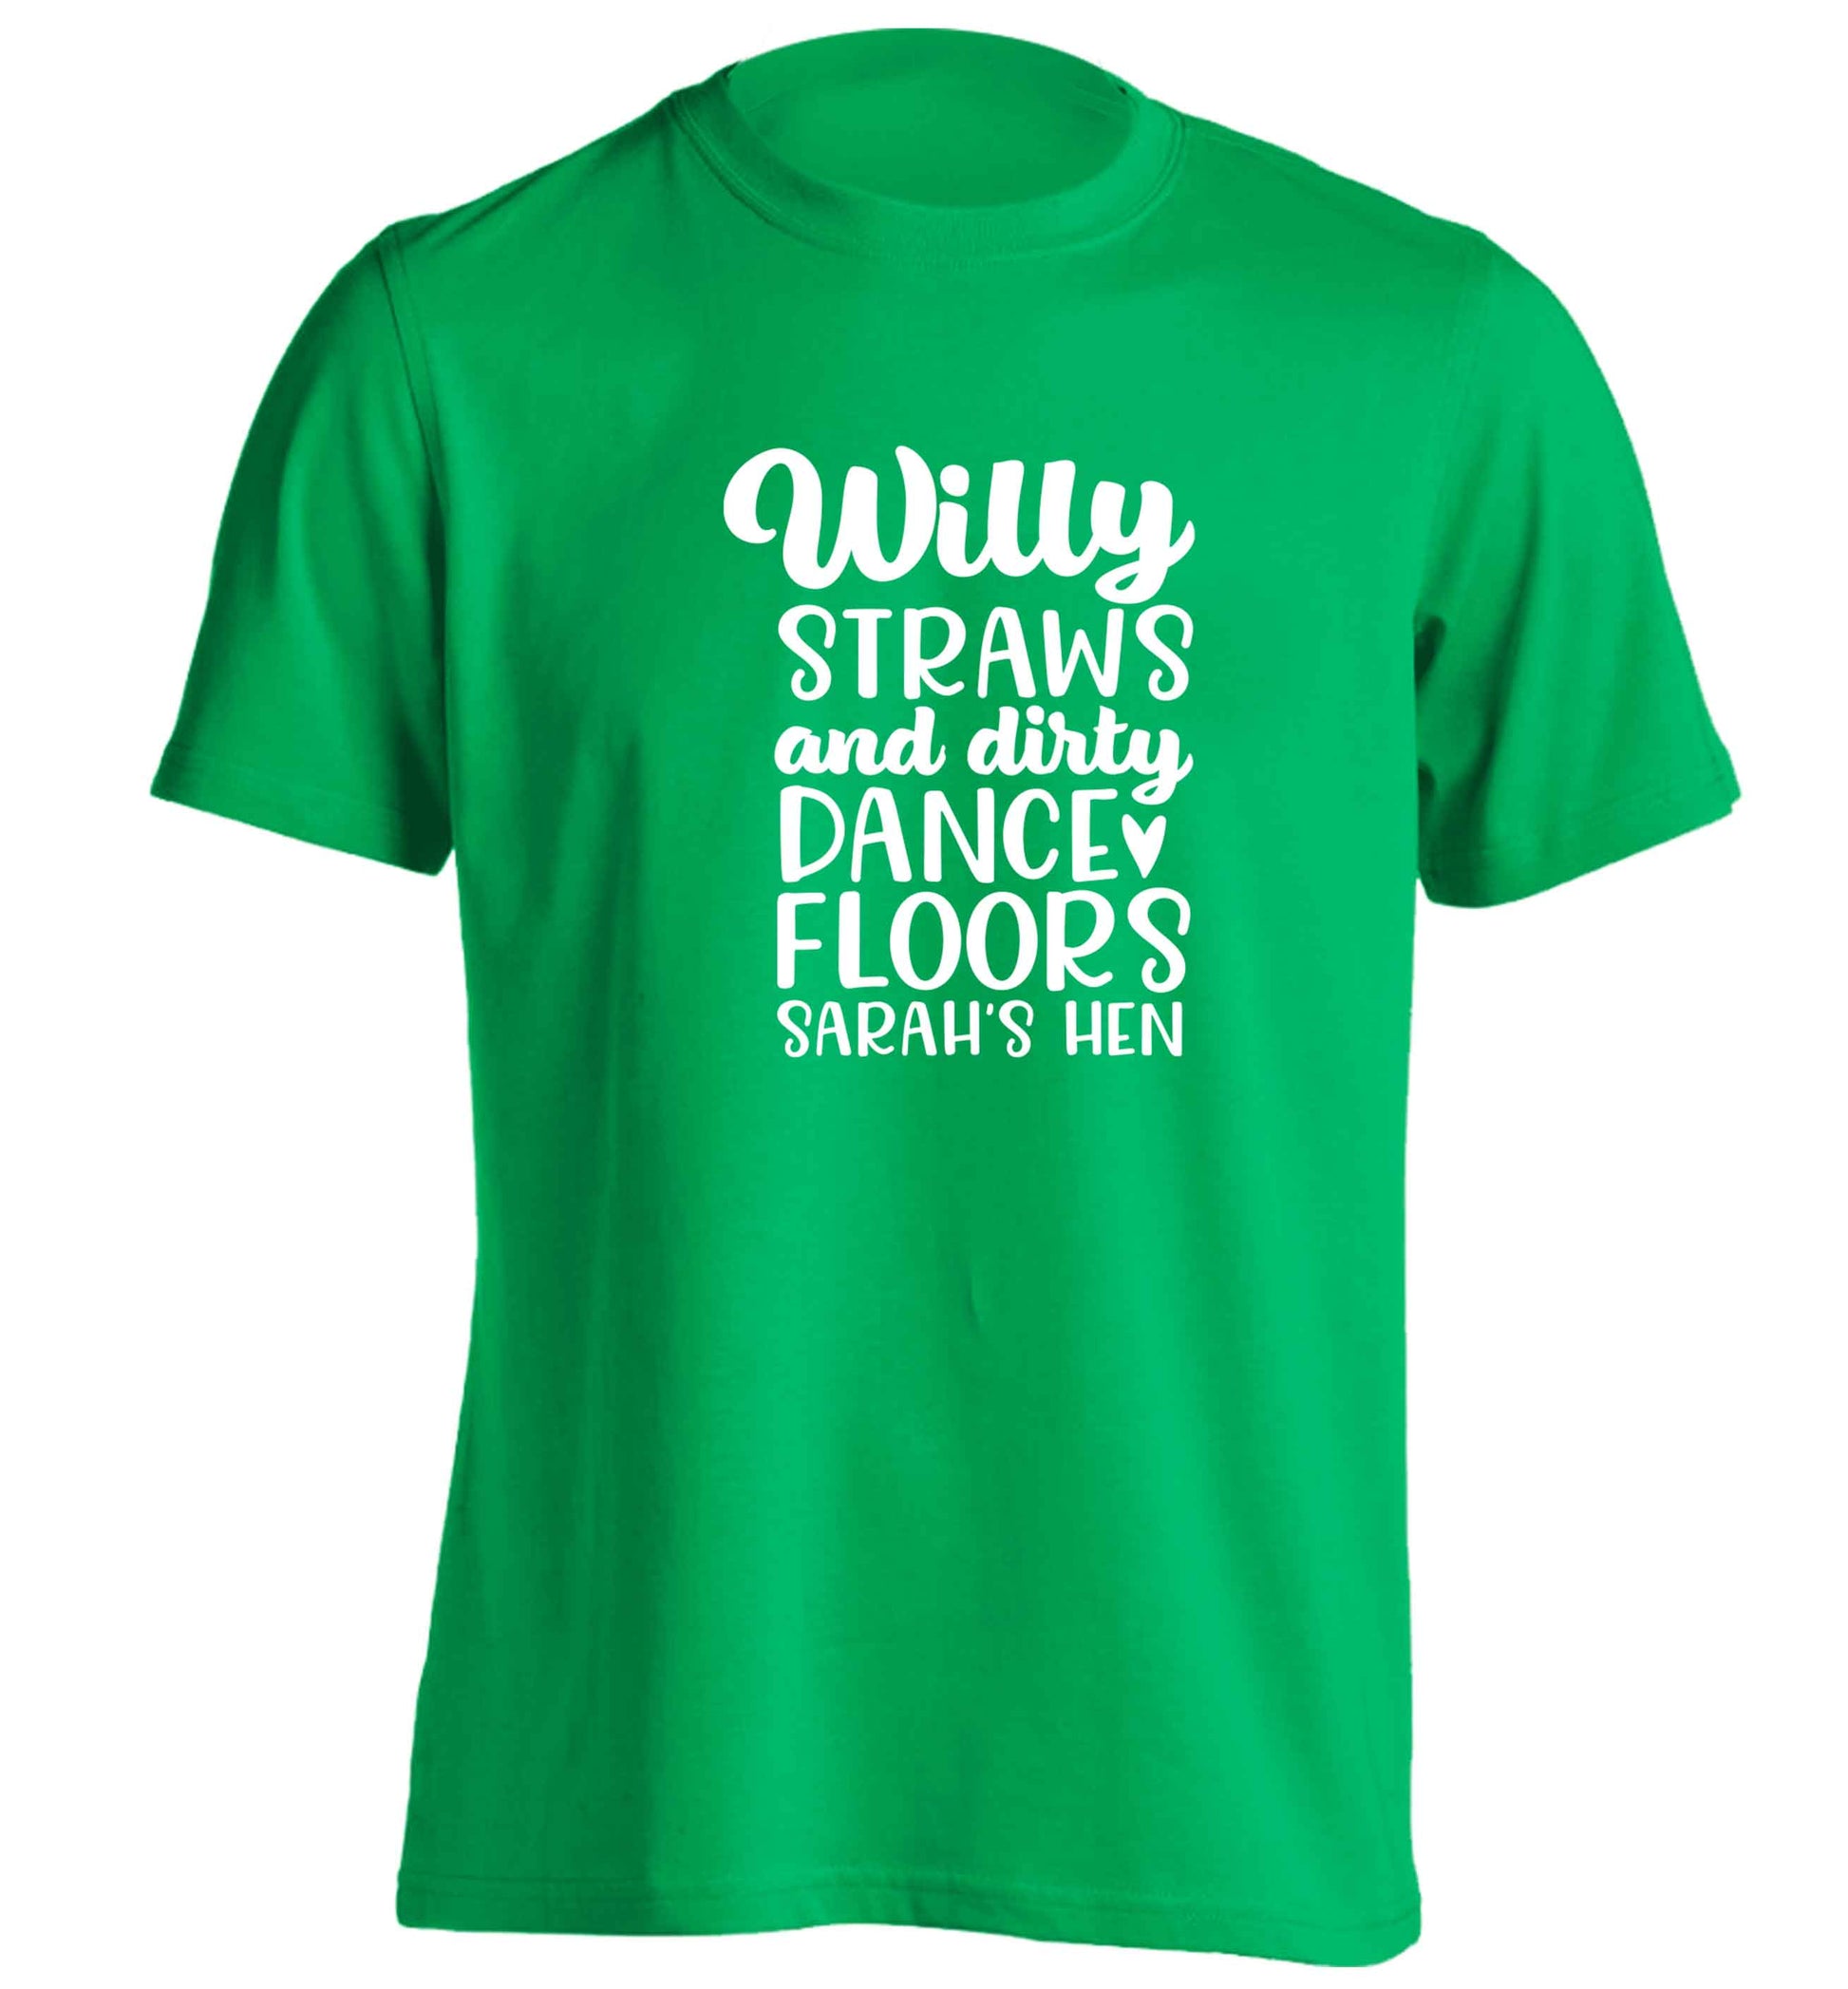 Willy straws and dirty dance floors adults unisex green Tshirt 2XL